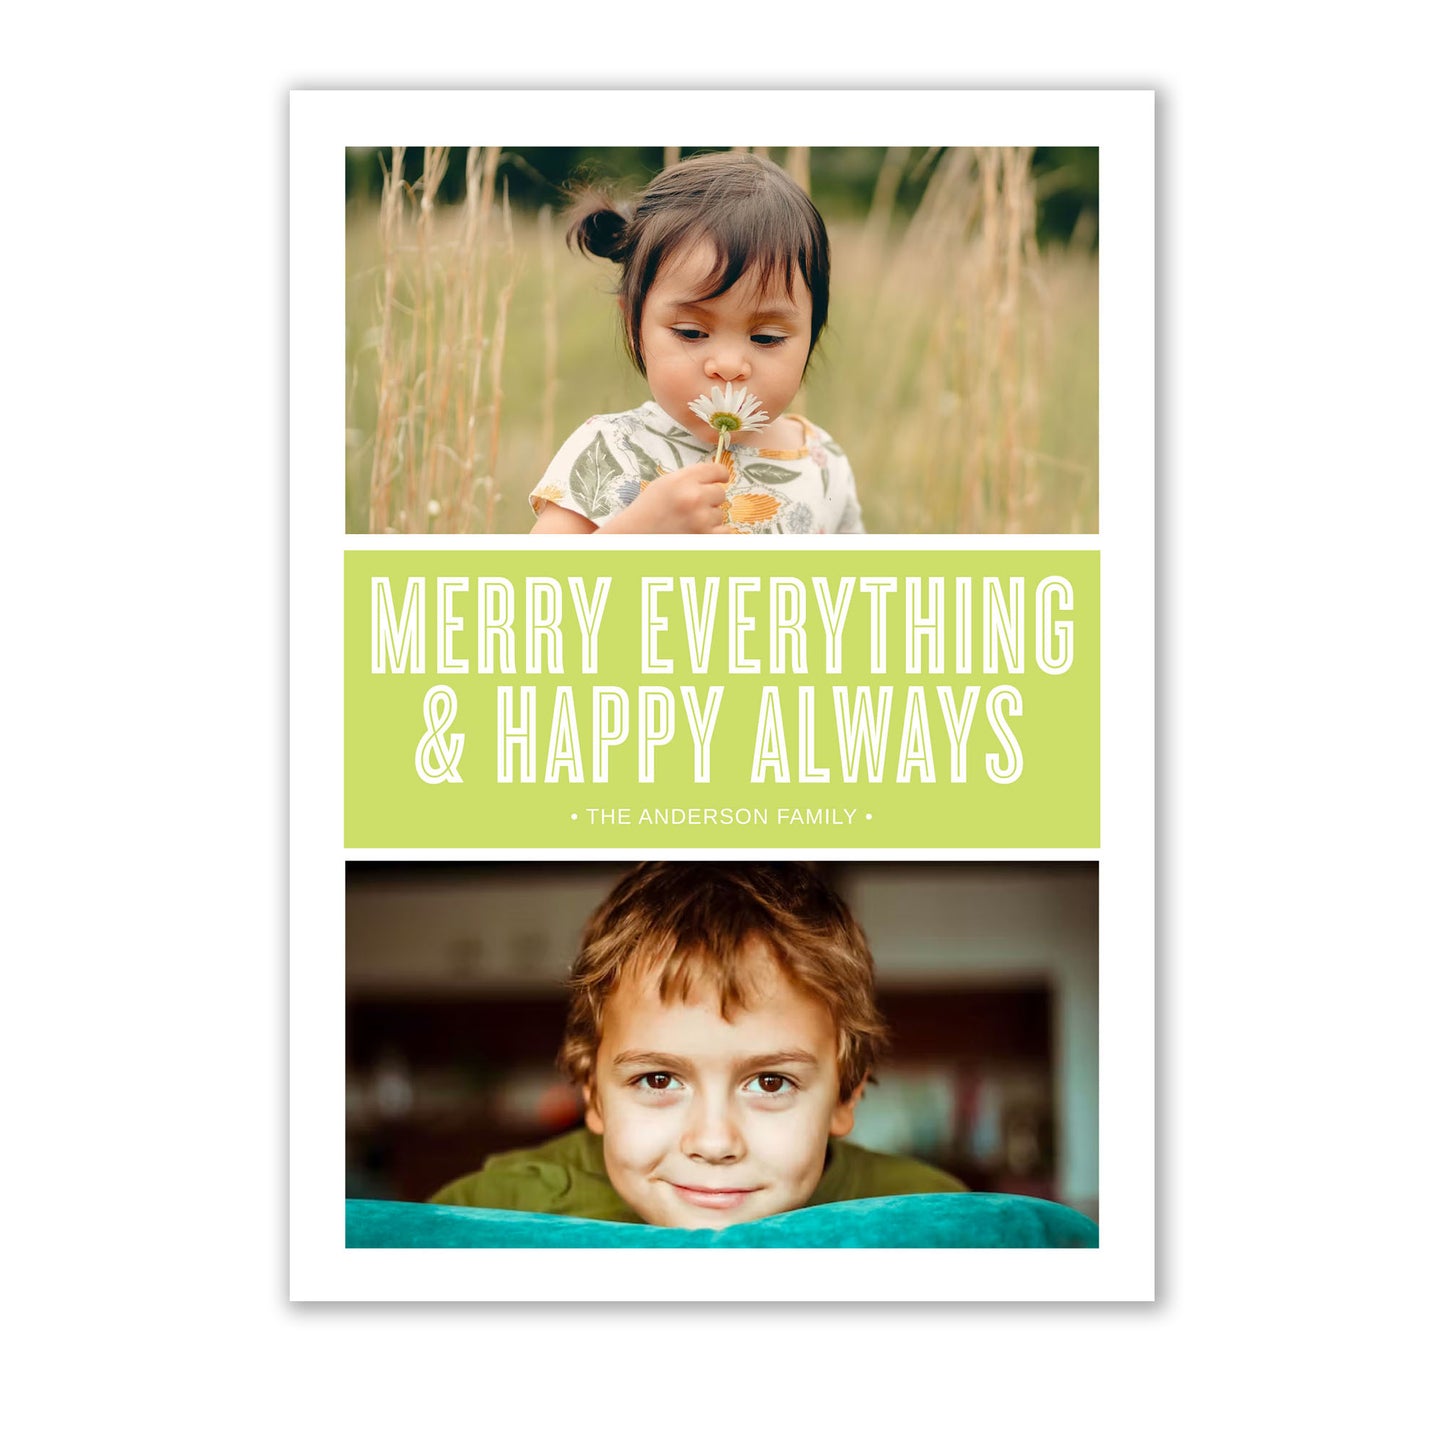 Send holiday cheer with a Merry Everything Holiday Photo Card from Noteworthy. Each card comes with unlined envelopes for a festive touch.